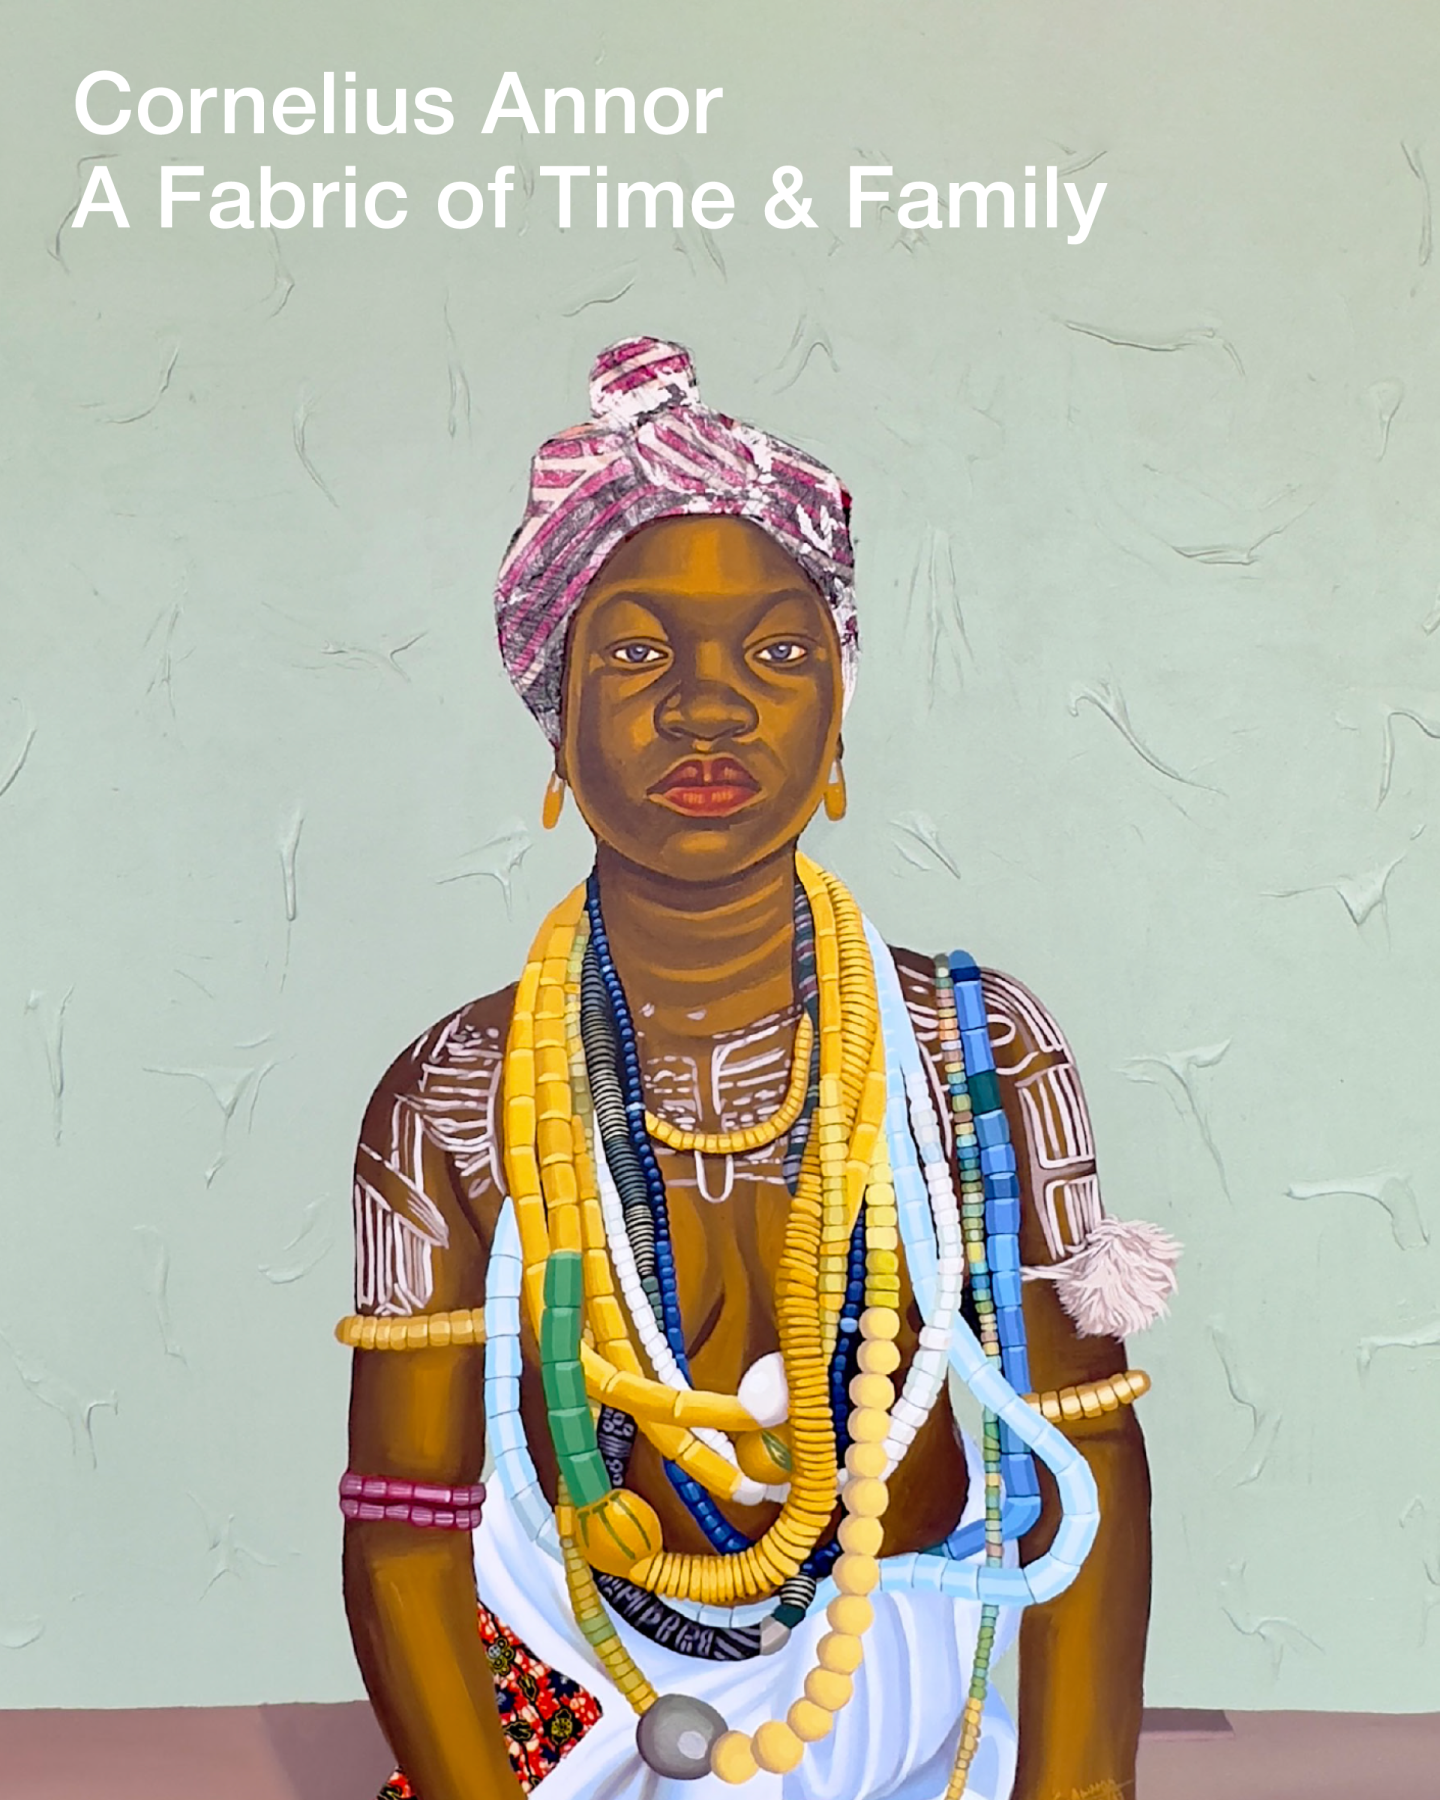 Cornelius Annor: A Fabric of Time &amp;amp; Family
Opening: Thursday, March 16, 6:00 - 8:00 PM
55 Great Jones Street

Image Link